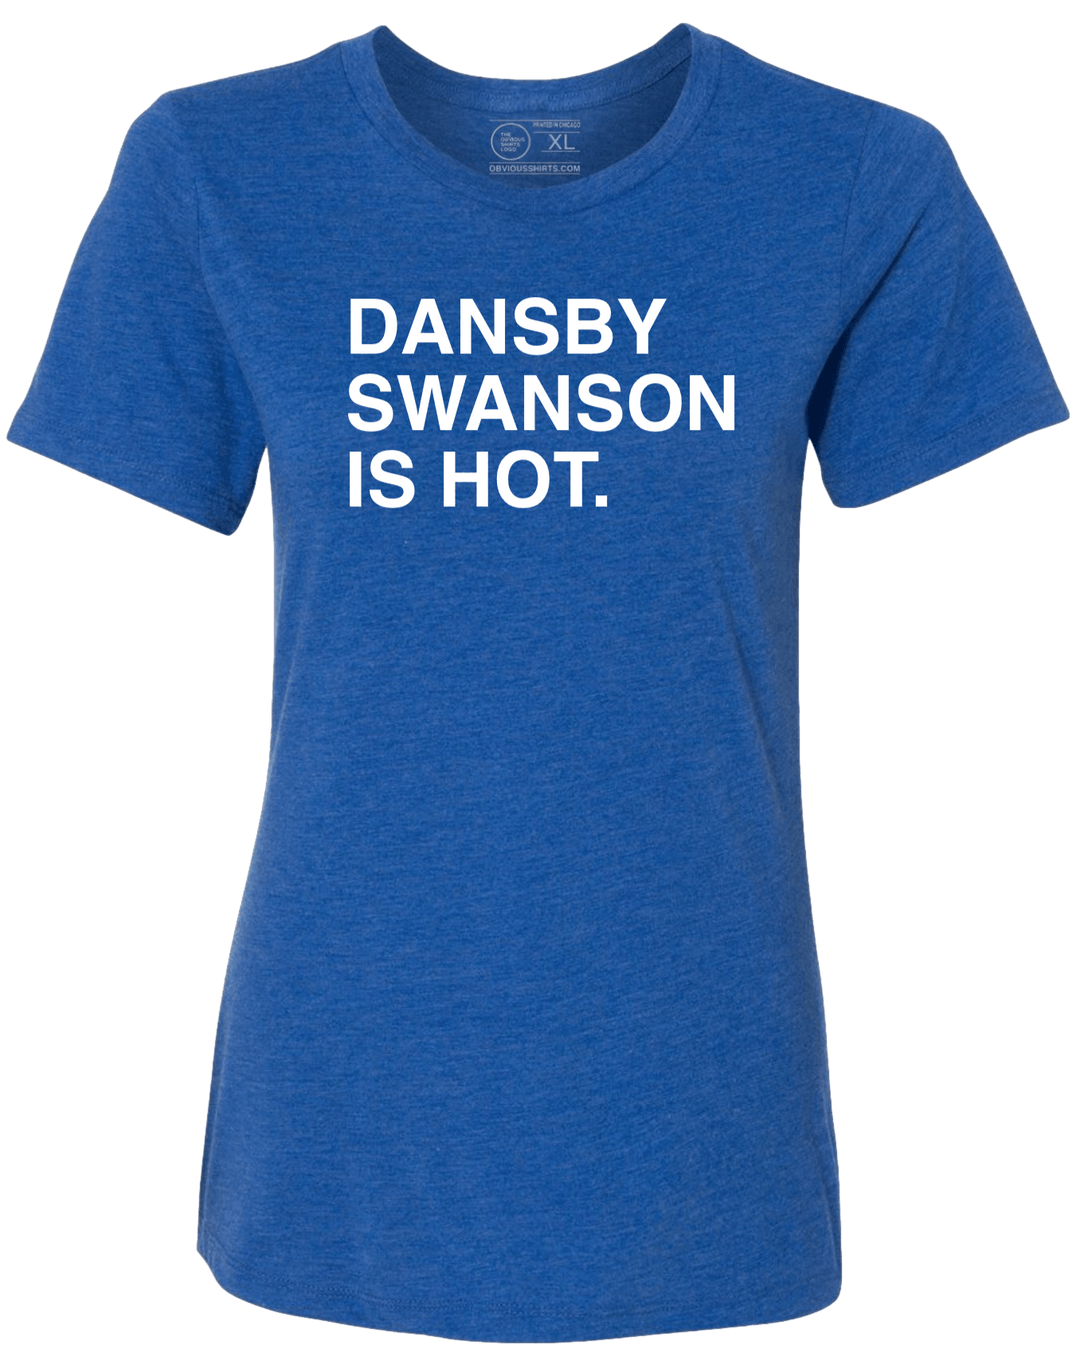 obviousshirts Dansby Swanson Is Hot. (Women's Crew) Blue / XS